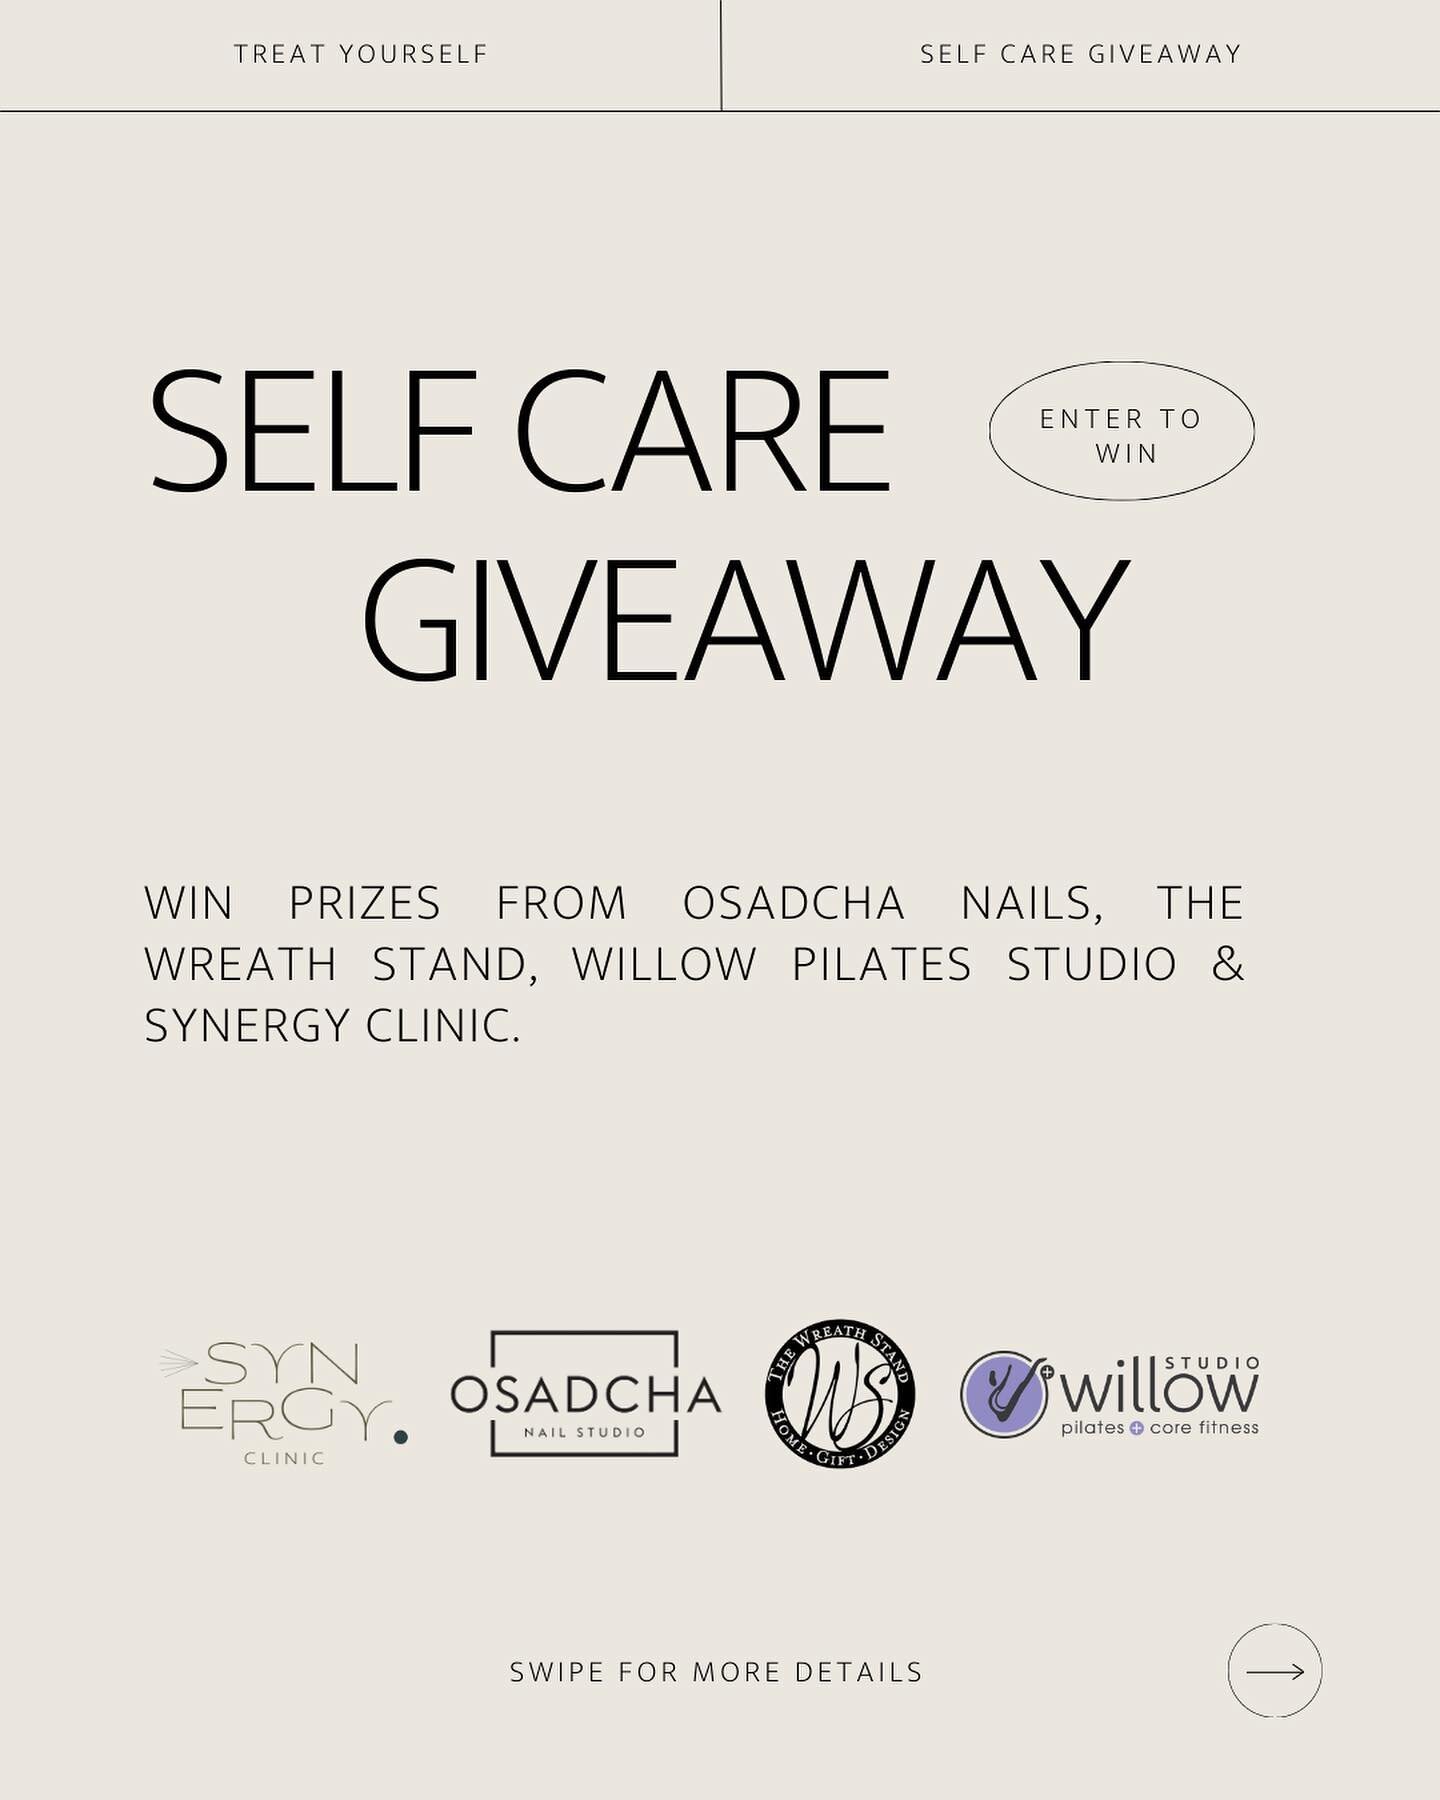 SELF-CARE GIVEAWAY🕊We have teamed up with @synergyclinictn @willowpilatesstudio @thewreathstand and @osadcha.nailstudio to gift one lucky person a self-care bundle. A perfect reminder to prioritize your mental health🤍

Enter to win @drinkdesoi from